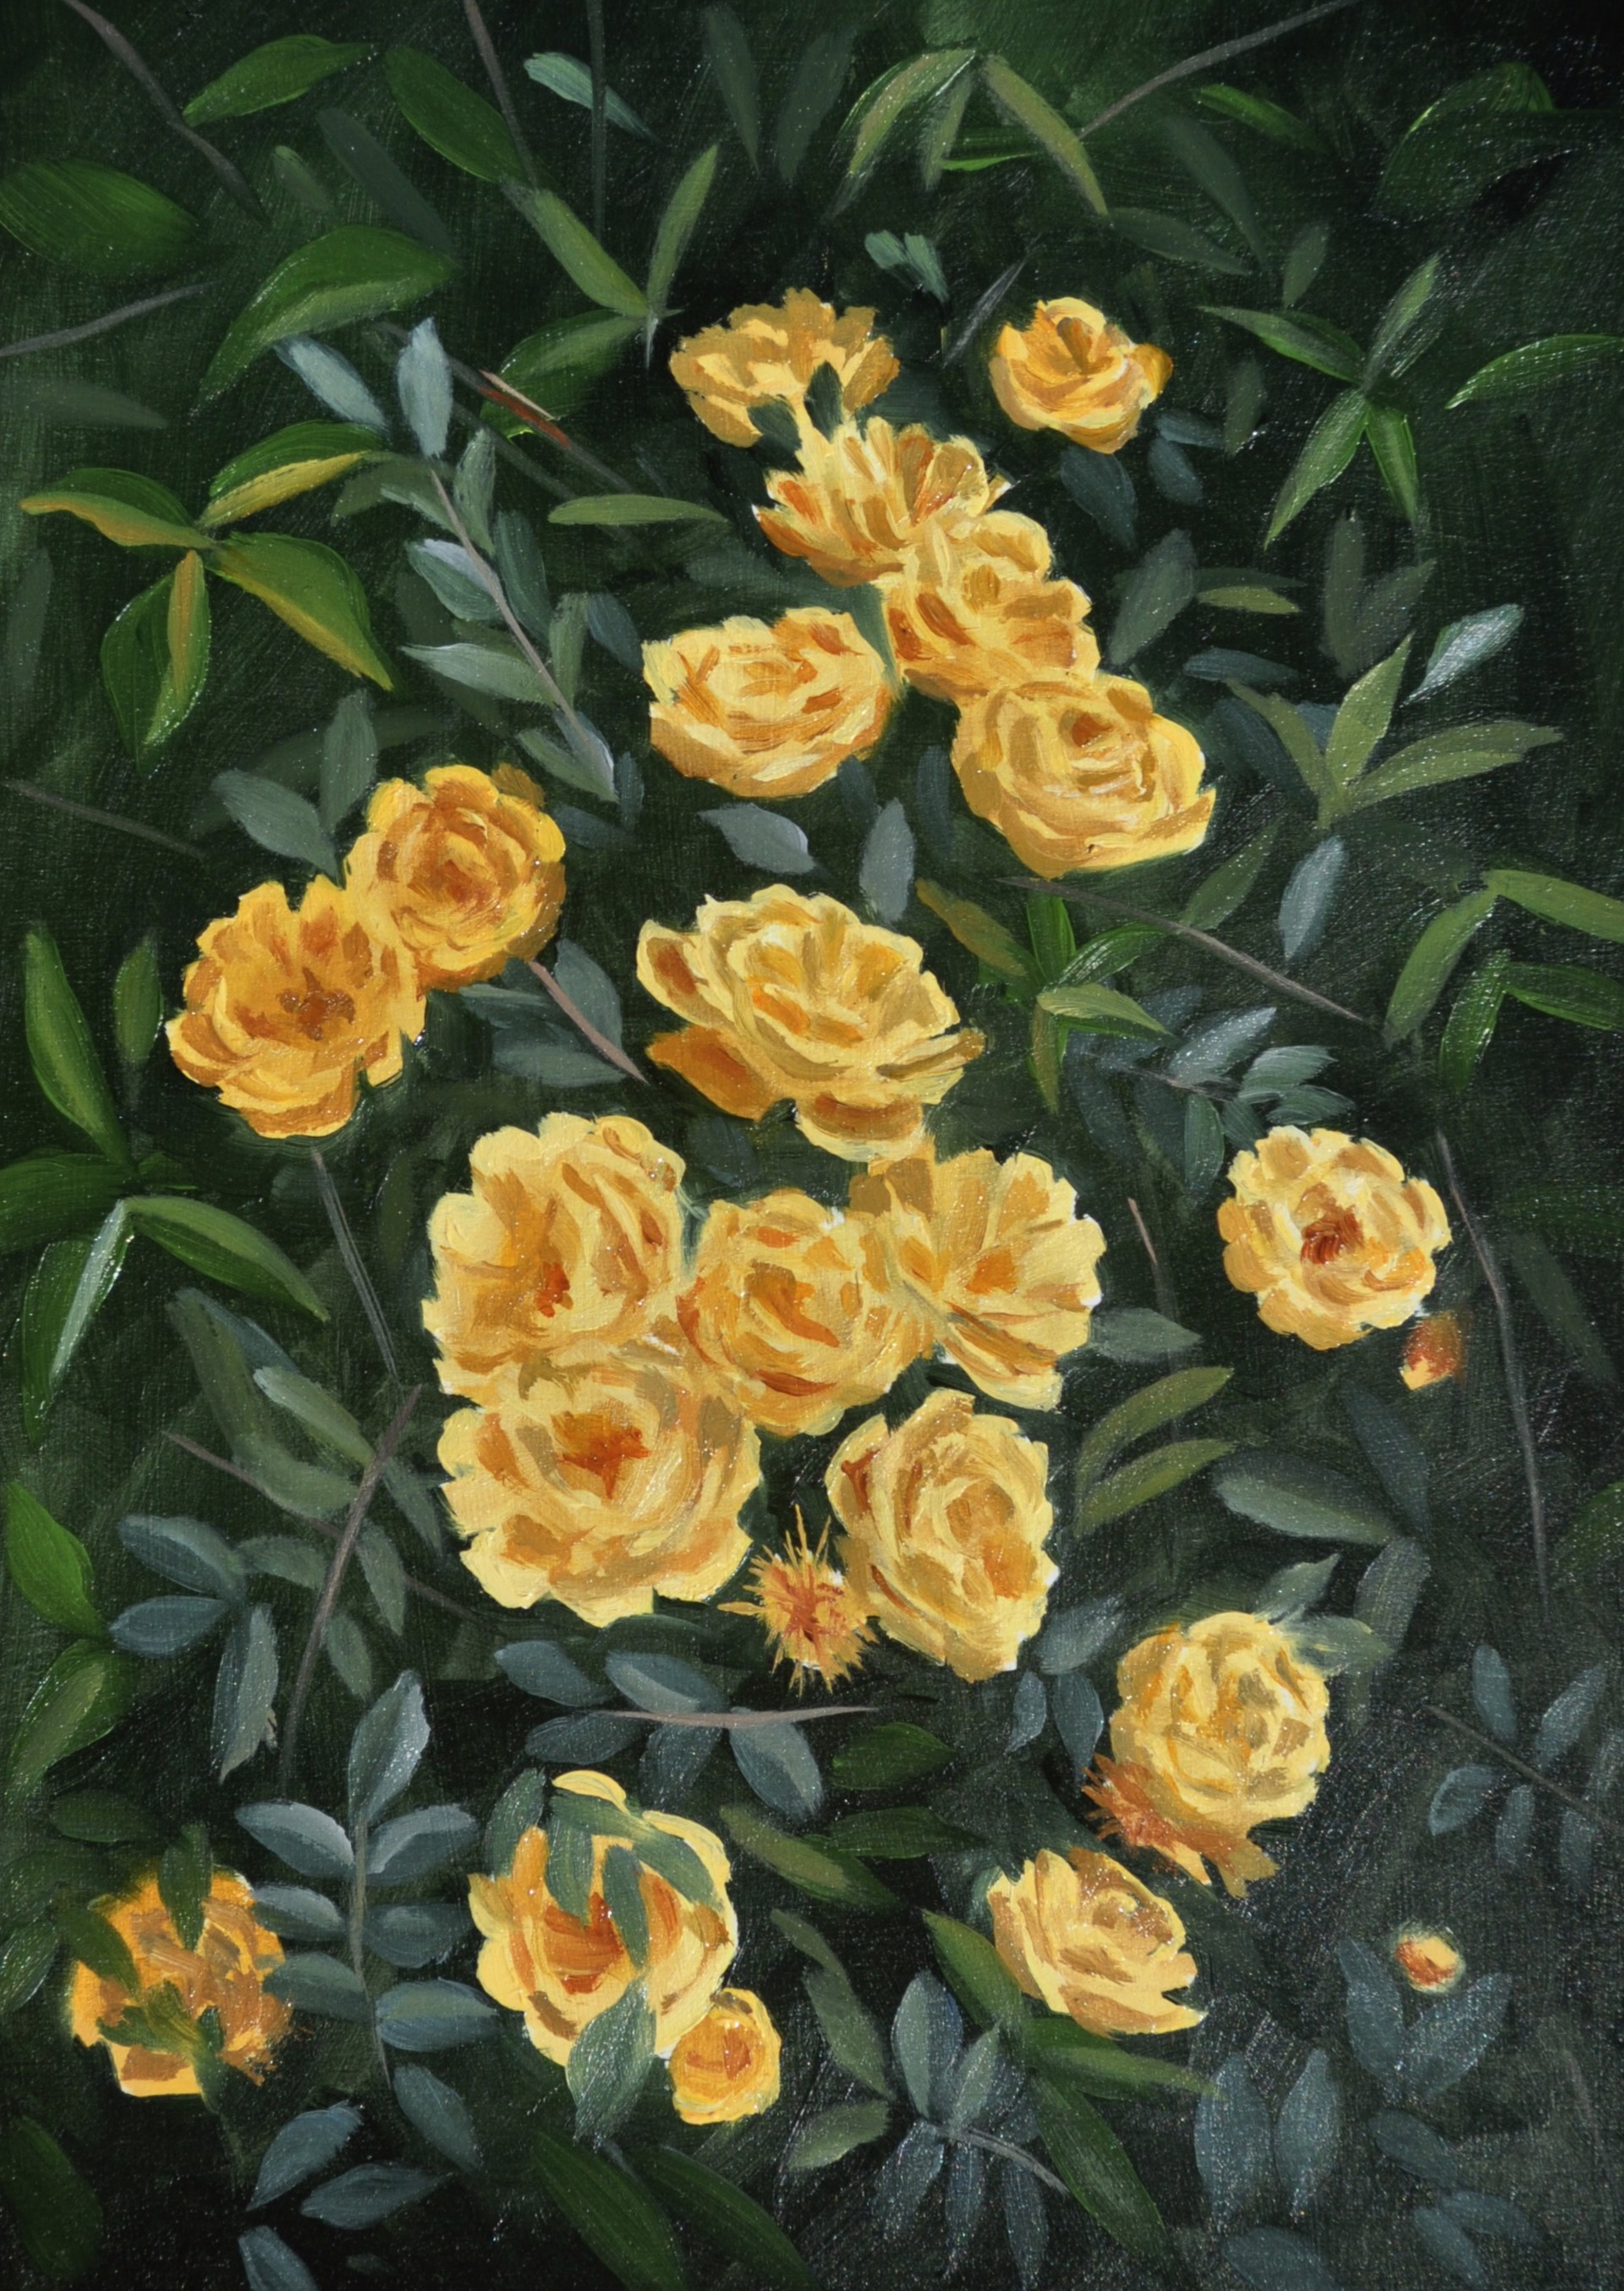 Cluster of Yellow Roses by Robin Hextrum